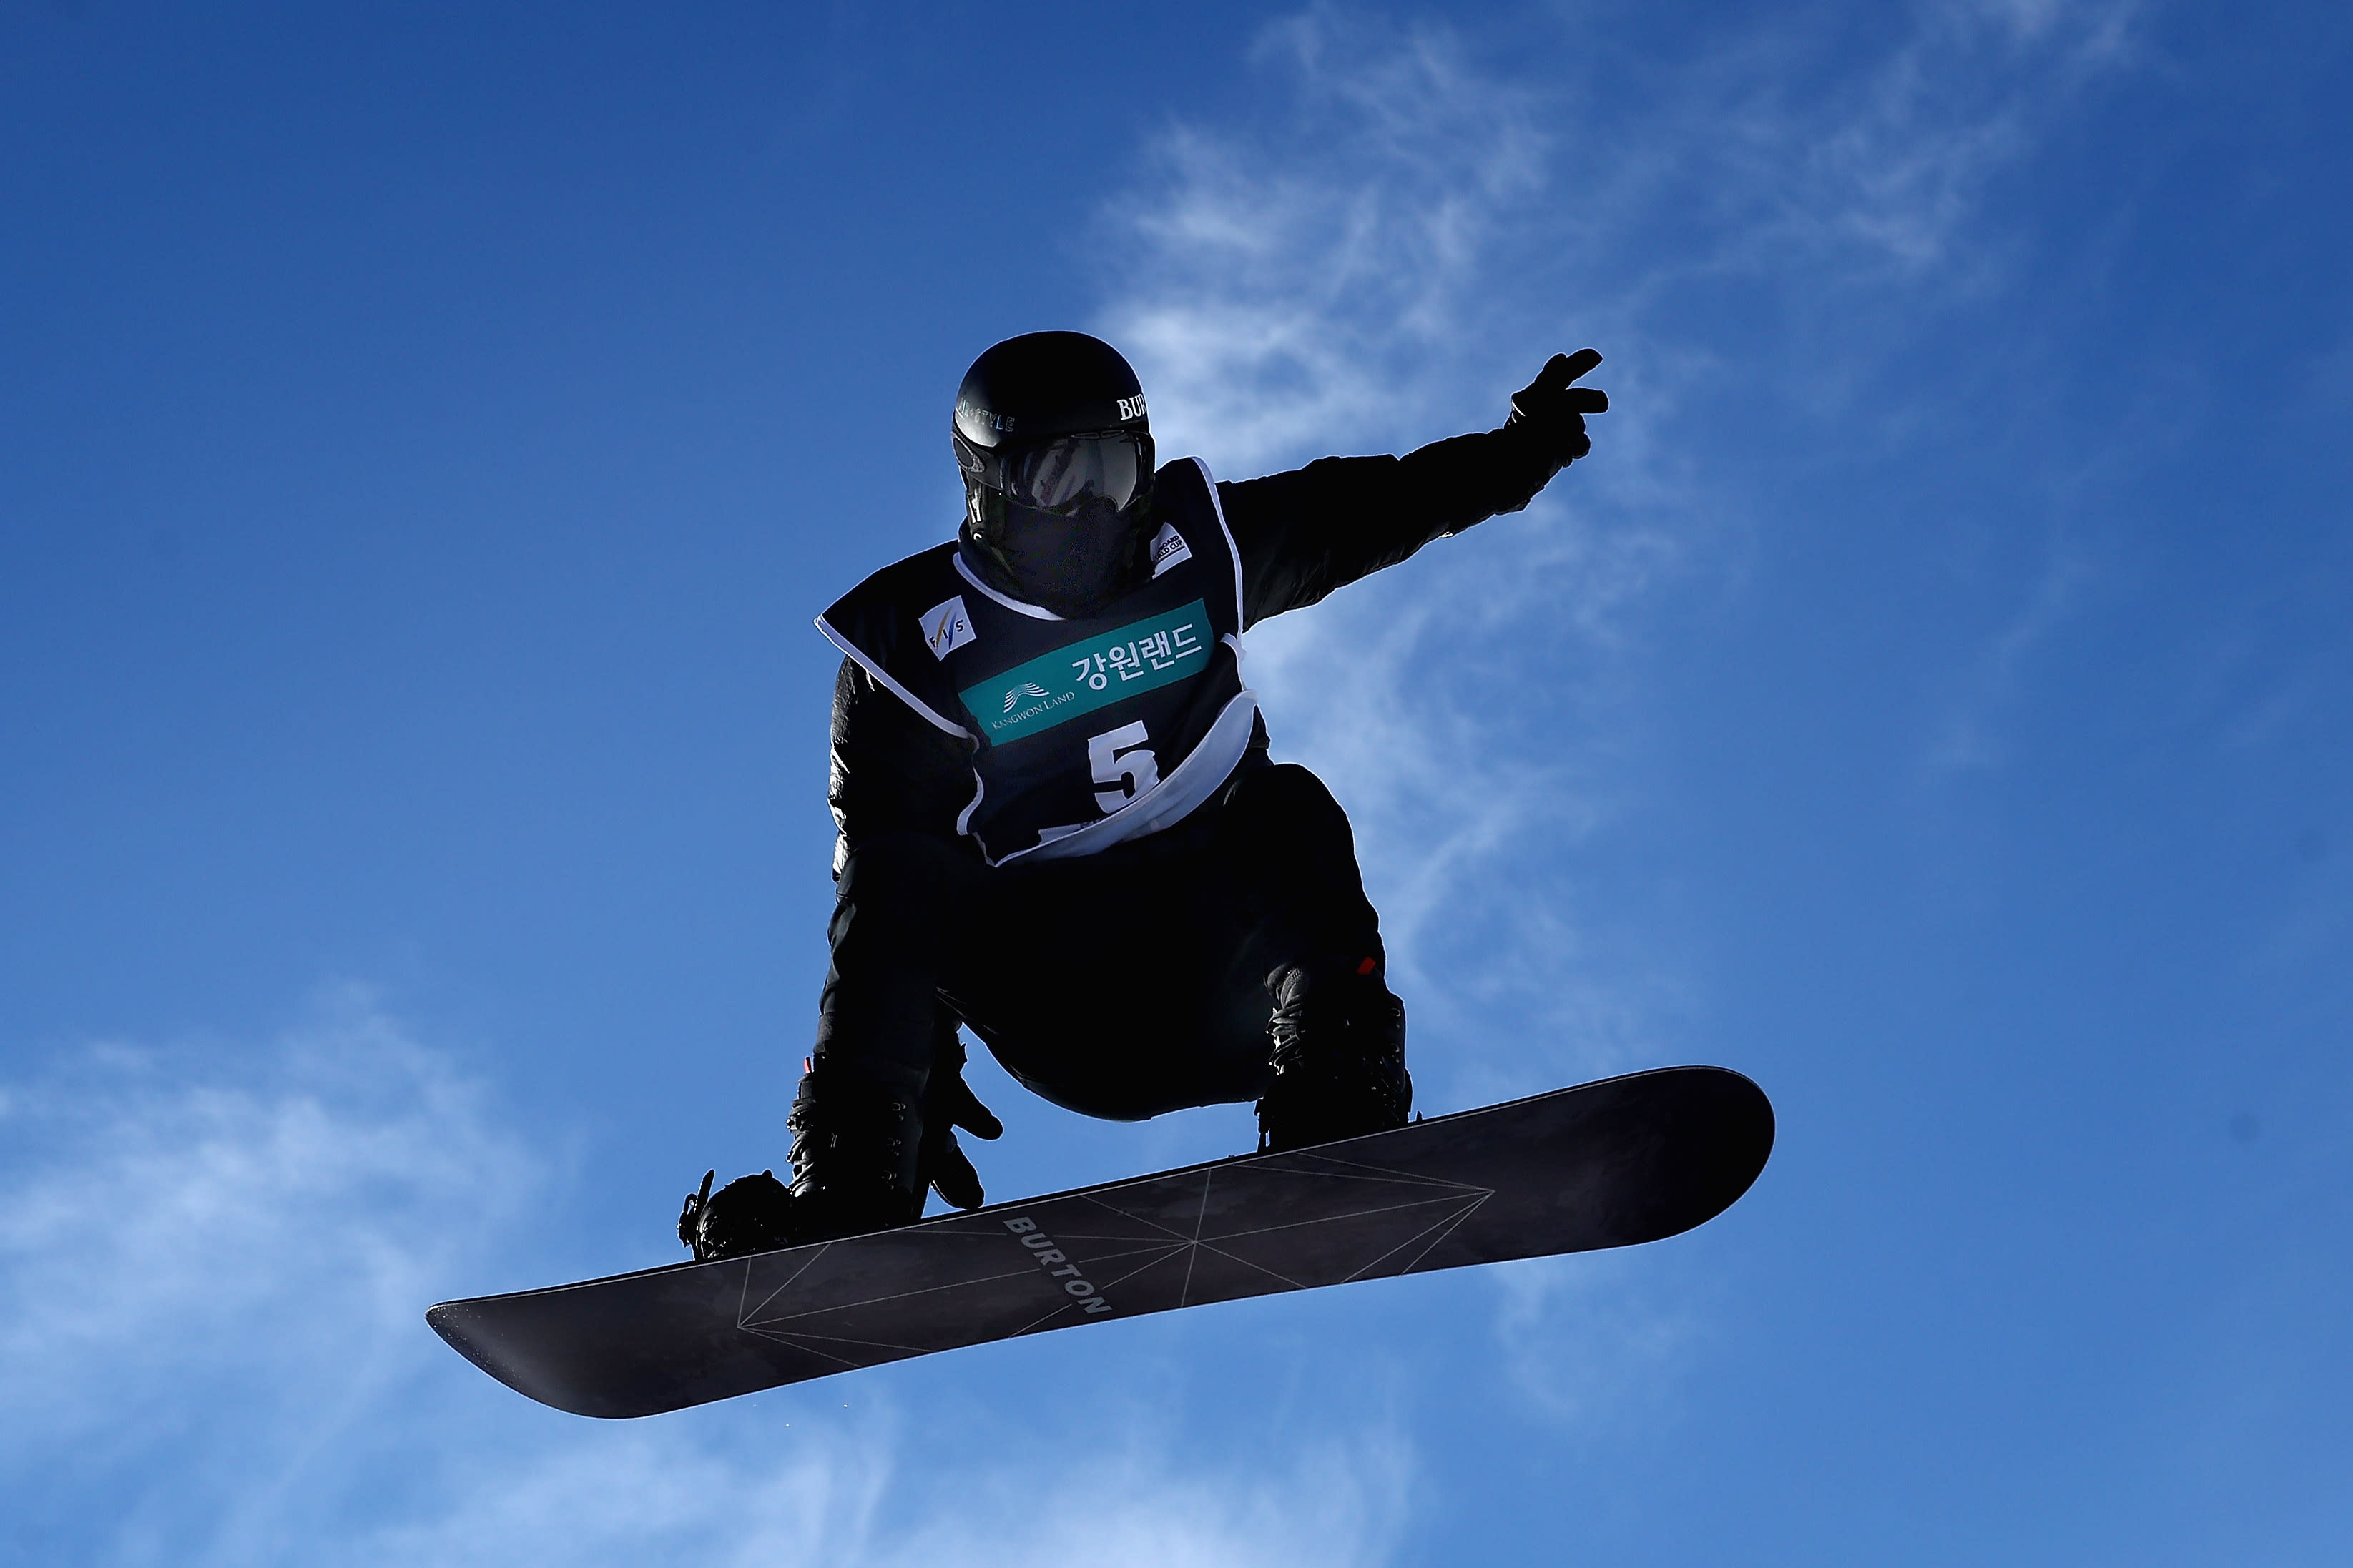 Shaun White 10 things you didn't know about the snowboarding star